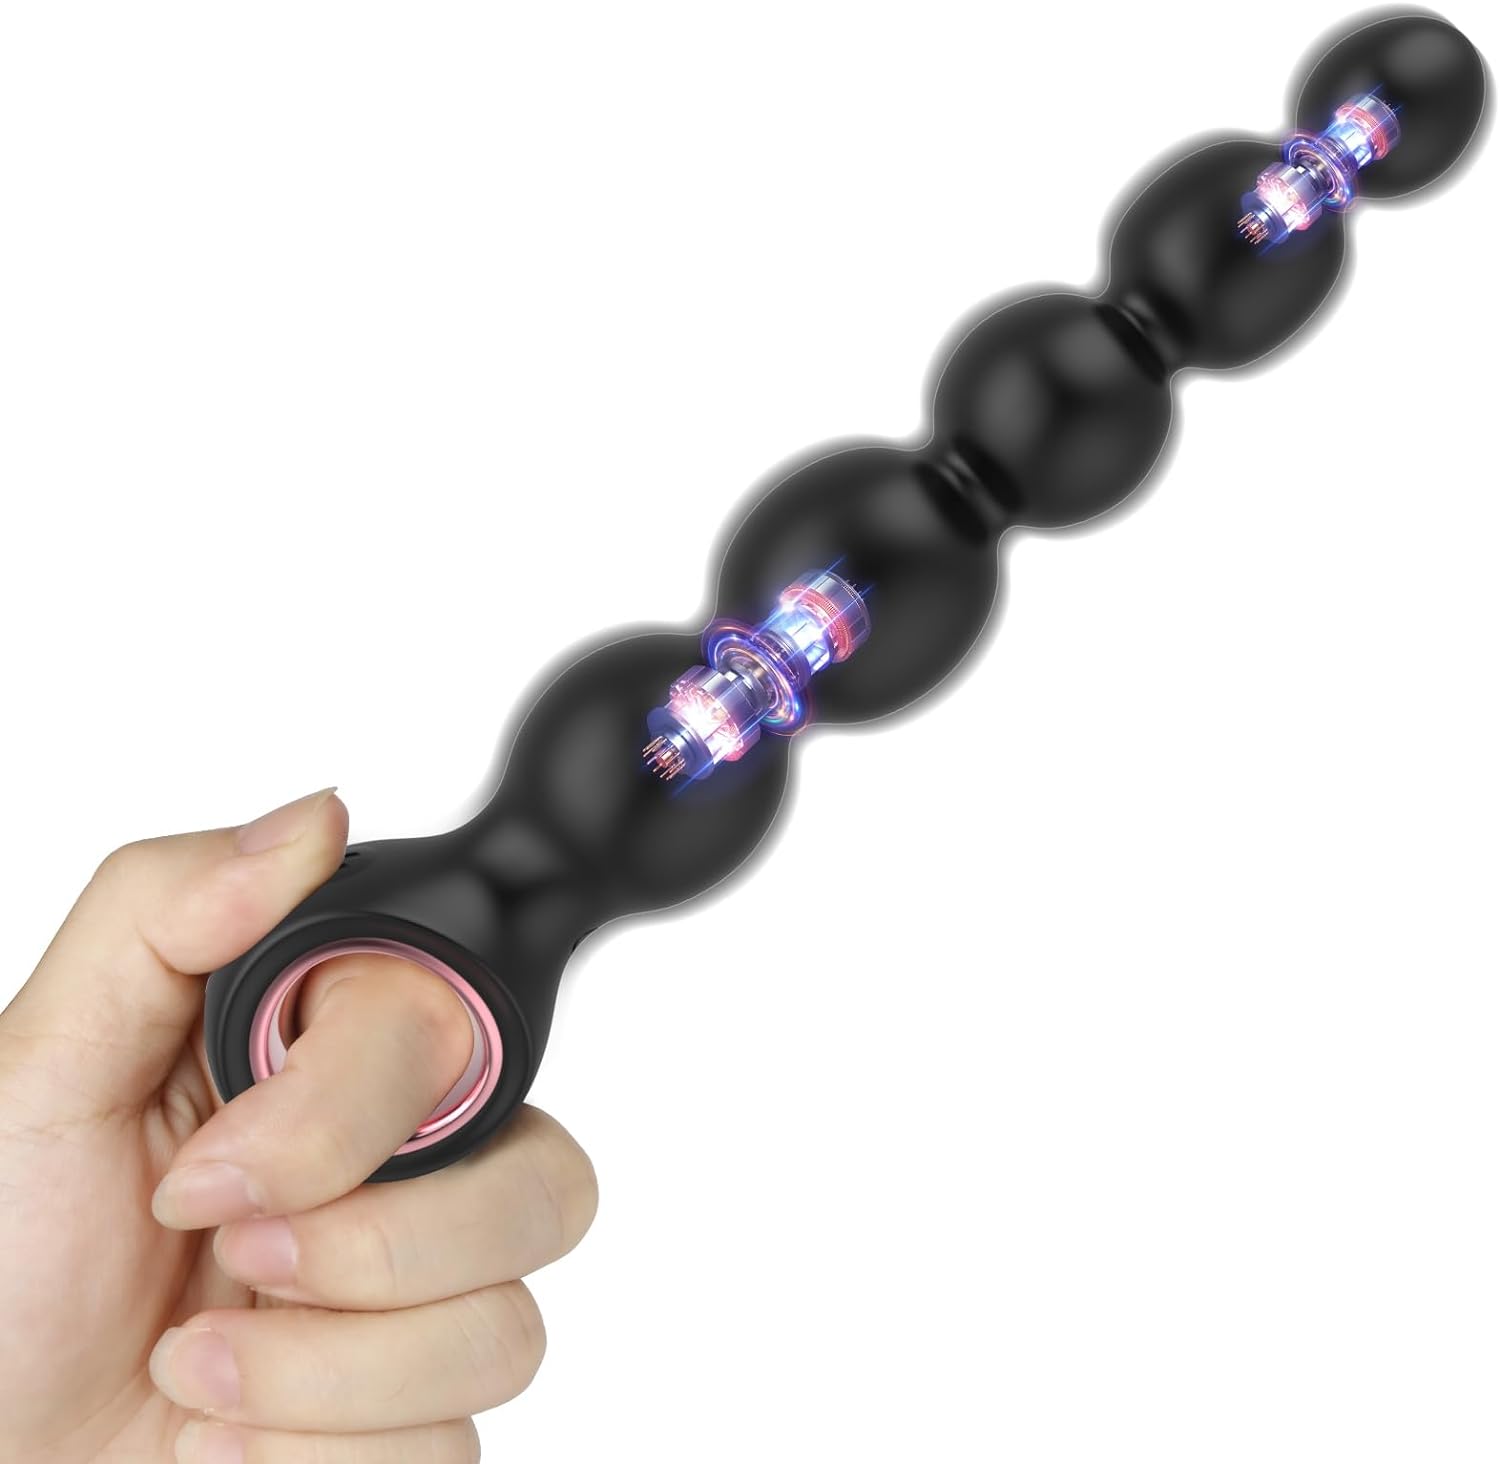 Anal Beads Sex Toys for Men, Anal Vibrator with Pull Ring Design Adult Toys Prostate Massager with 2 Powerful Motors & 10 Vibrating Modes, Male Sex Toys Dildo Anal Butt Plug for Men Women Couples